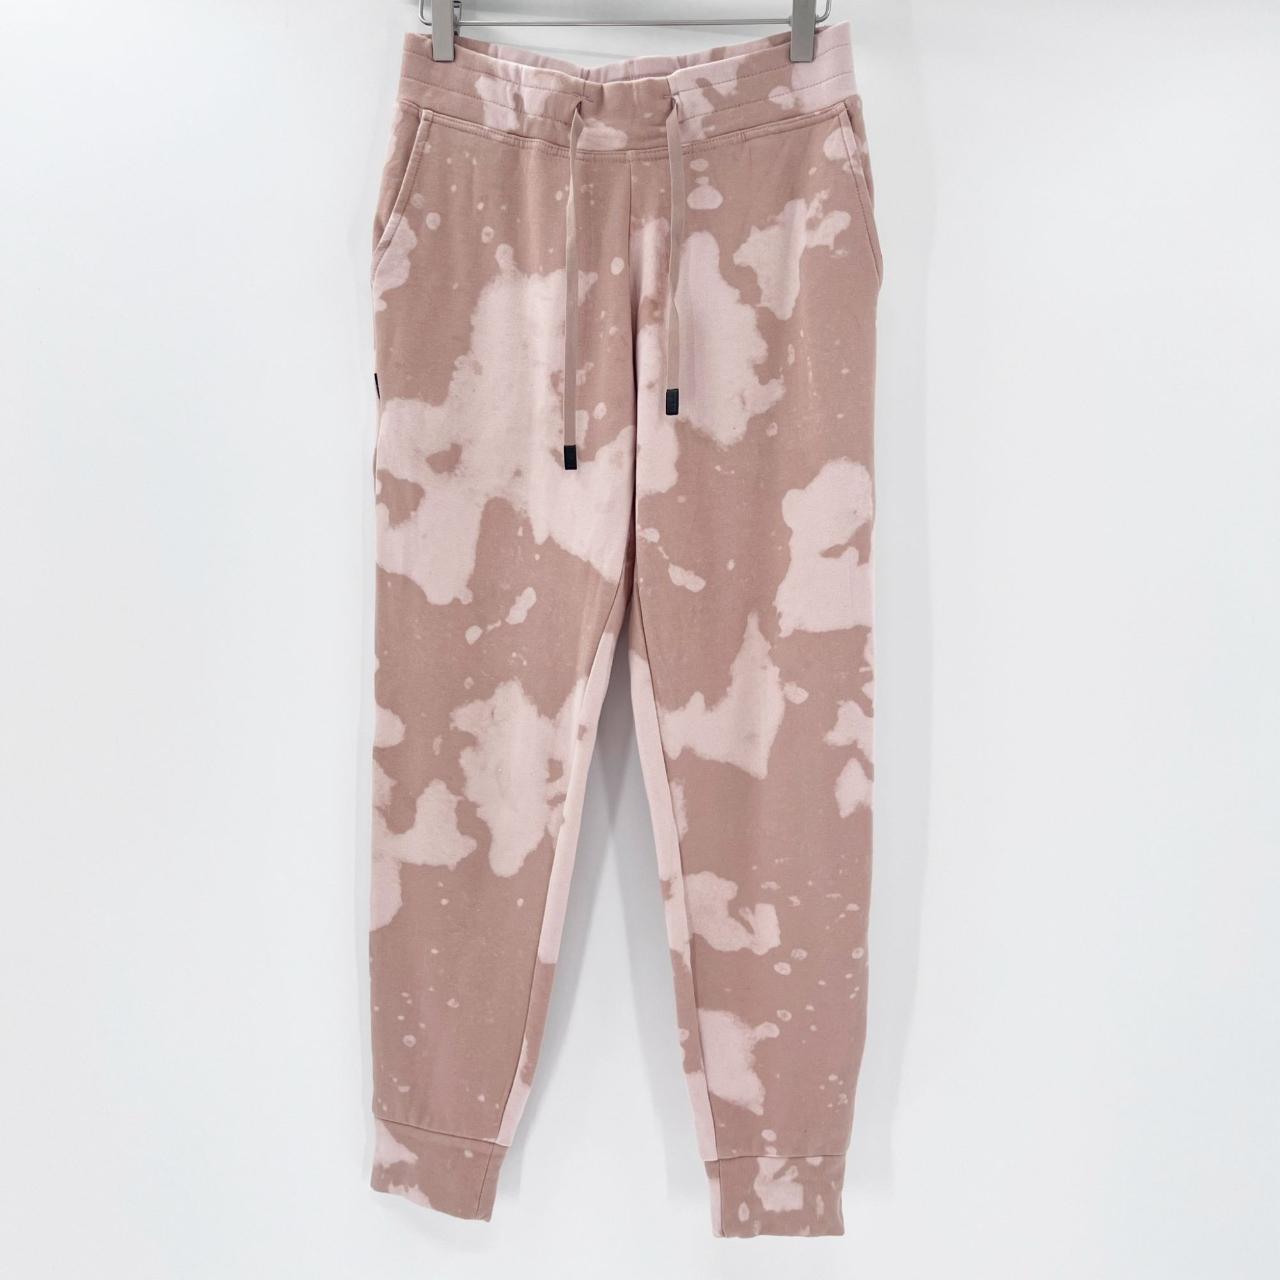 Product Image 1 - Stance Women's Pink Tan Cow